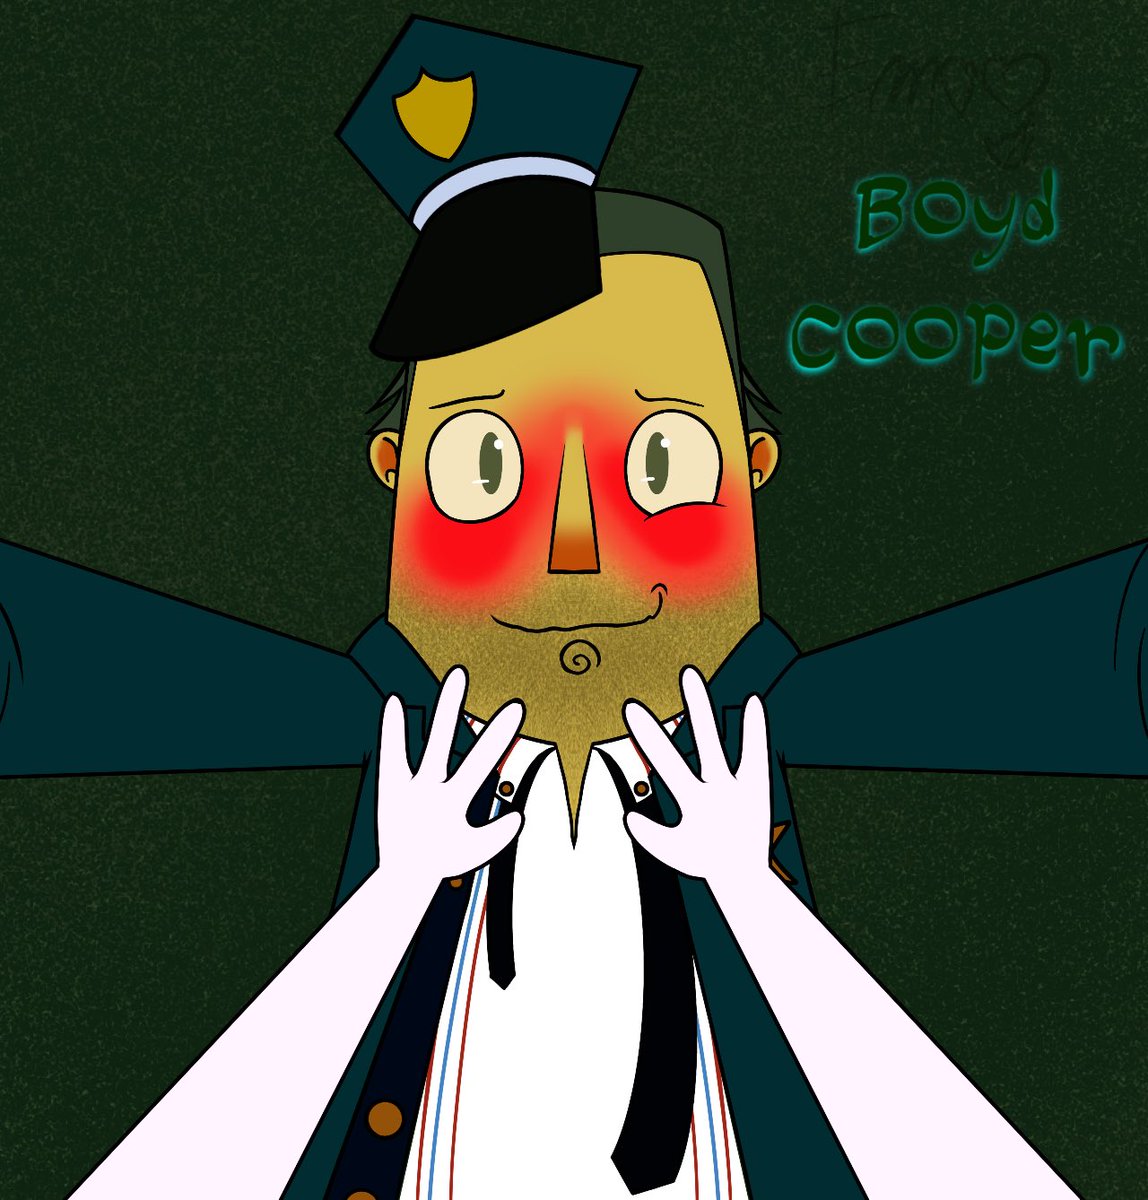 Sosig aa Omg Since Psychonauts 2 It S Coming Out Next Year I Decided To Redraw Some Boyd Cooper Milkman X Viewer Art Cause He Needs Some Love Dang It